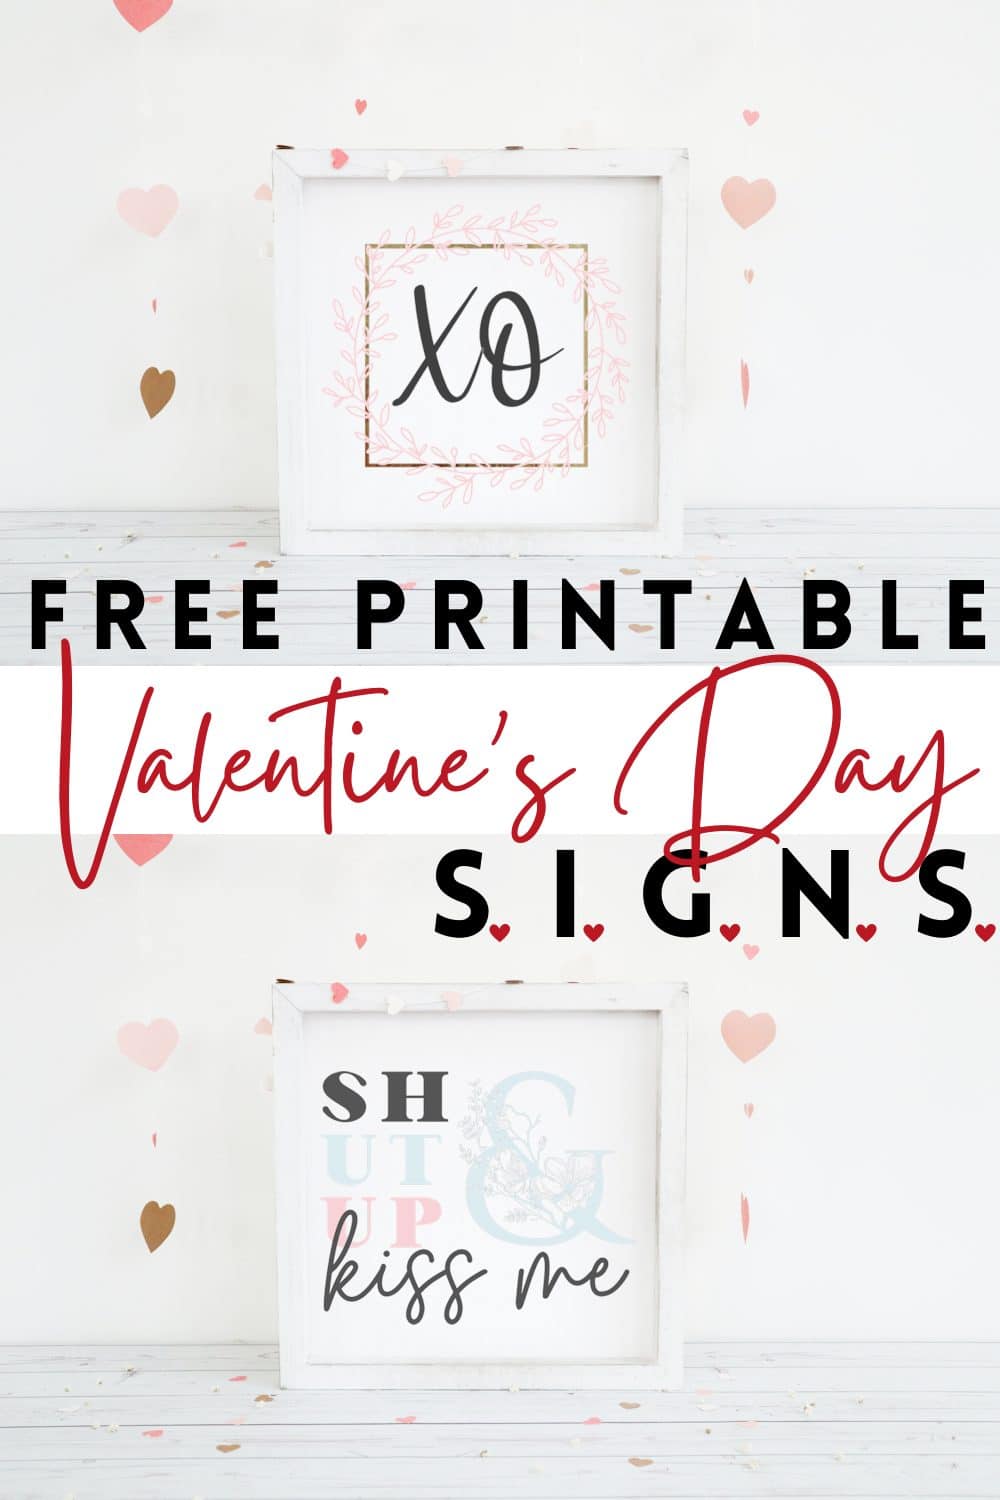 Free Printable Valentines Day Signs 3